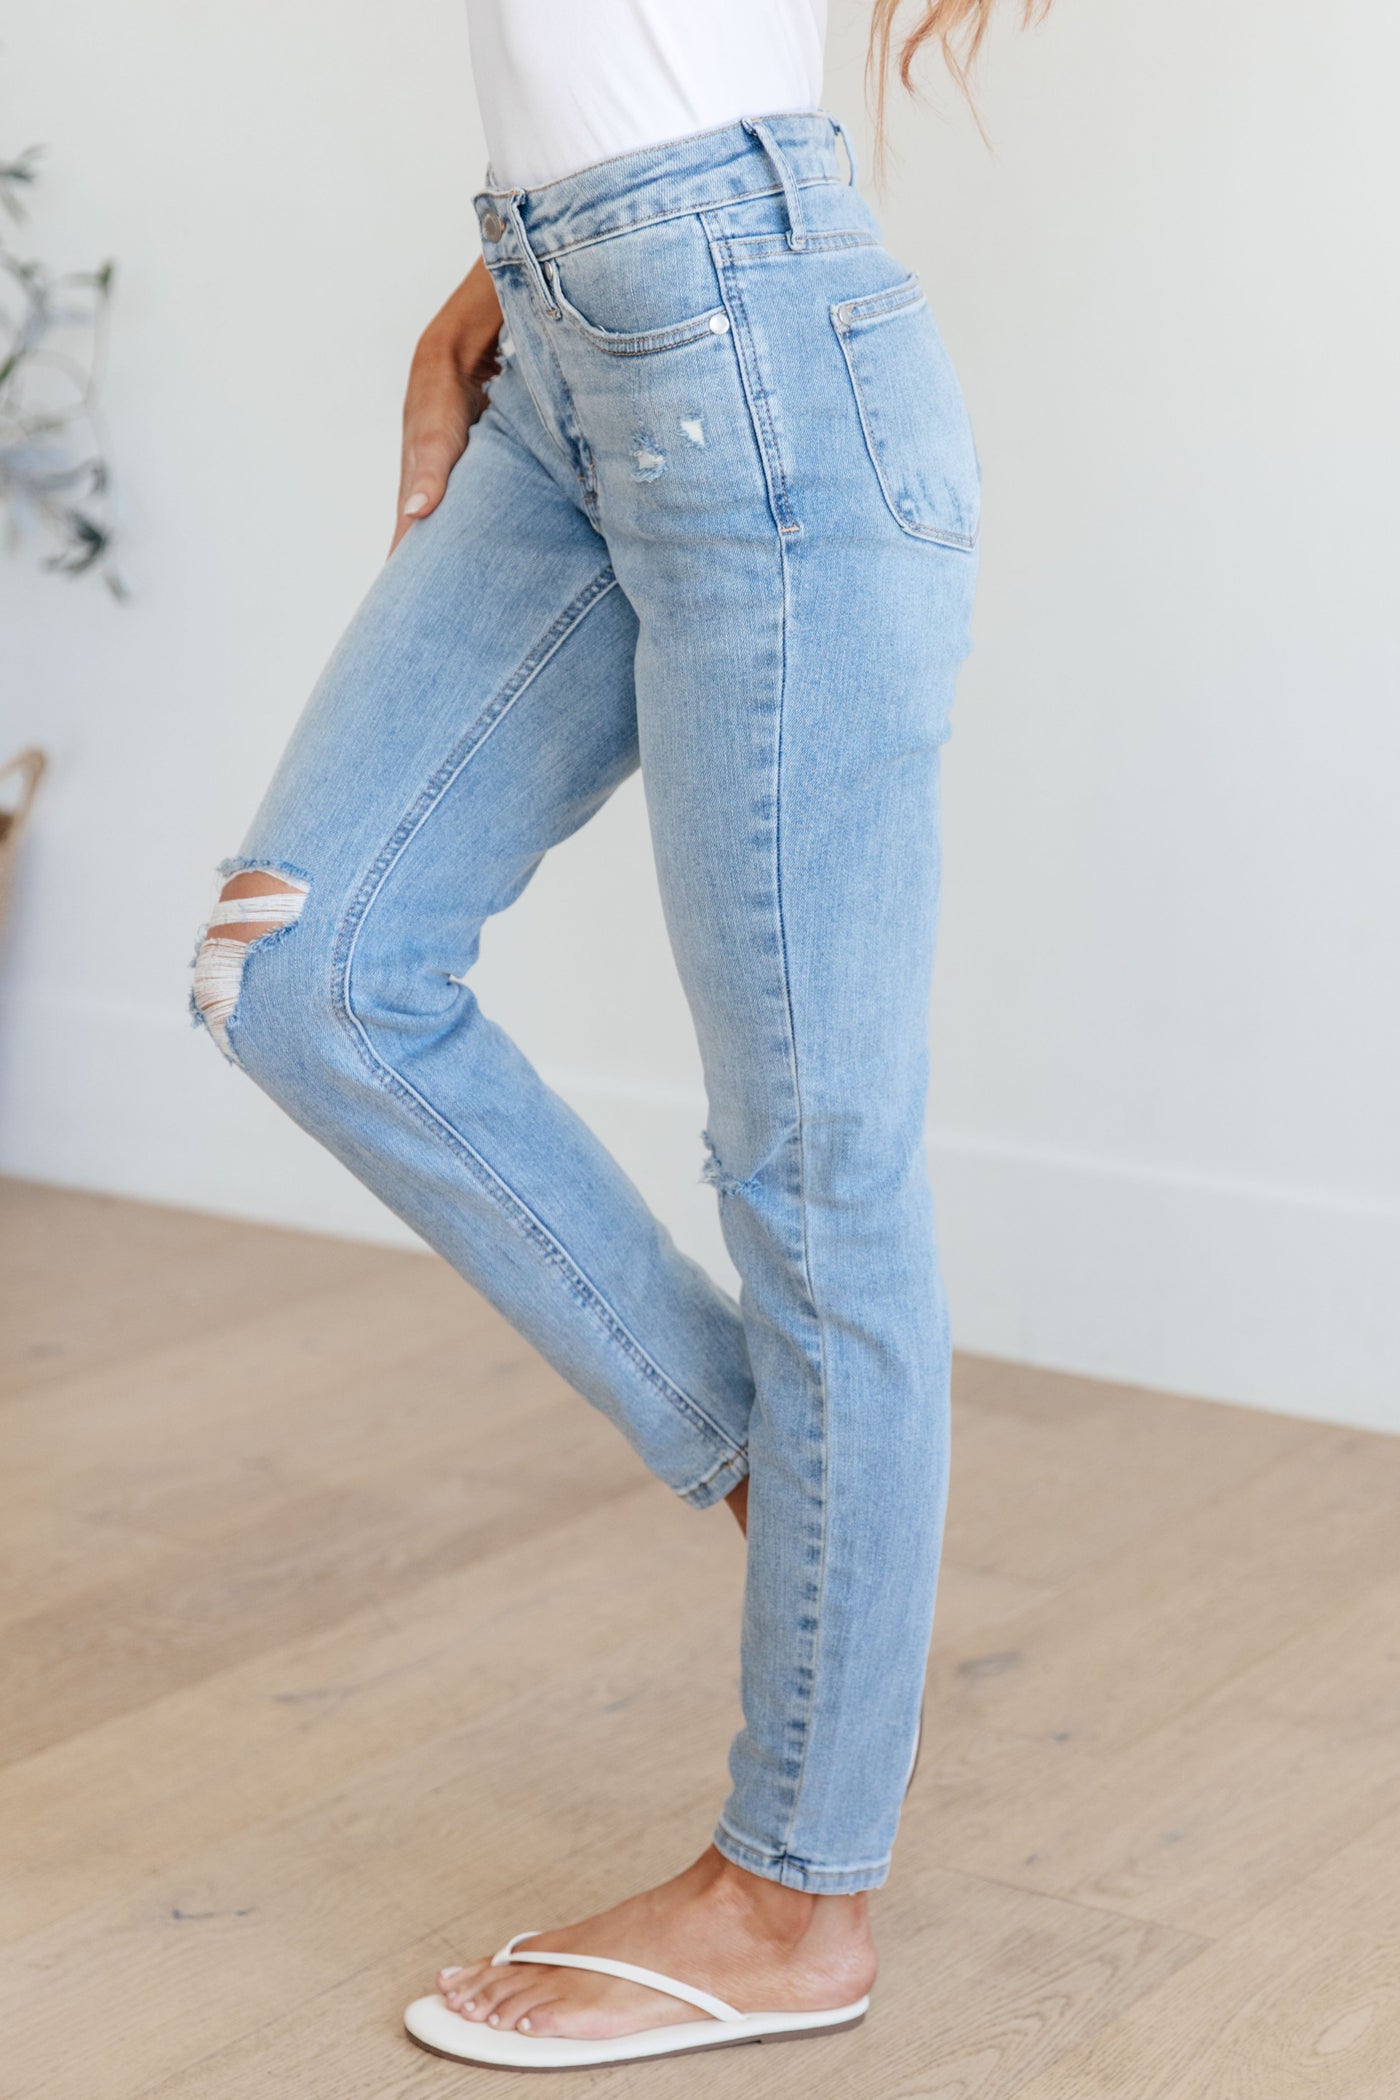 Eloise Mid Rise Control Top Distressed Skinny Jeans-Denim-Ave Shops-Market Street Nest, Fashionable Clothing, Shoes and Home Décor Located in Mabank, TX